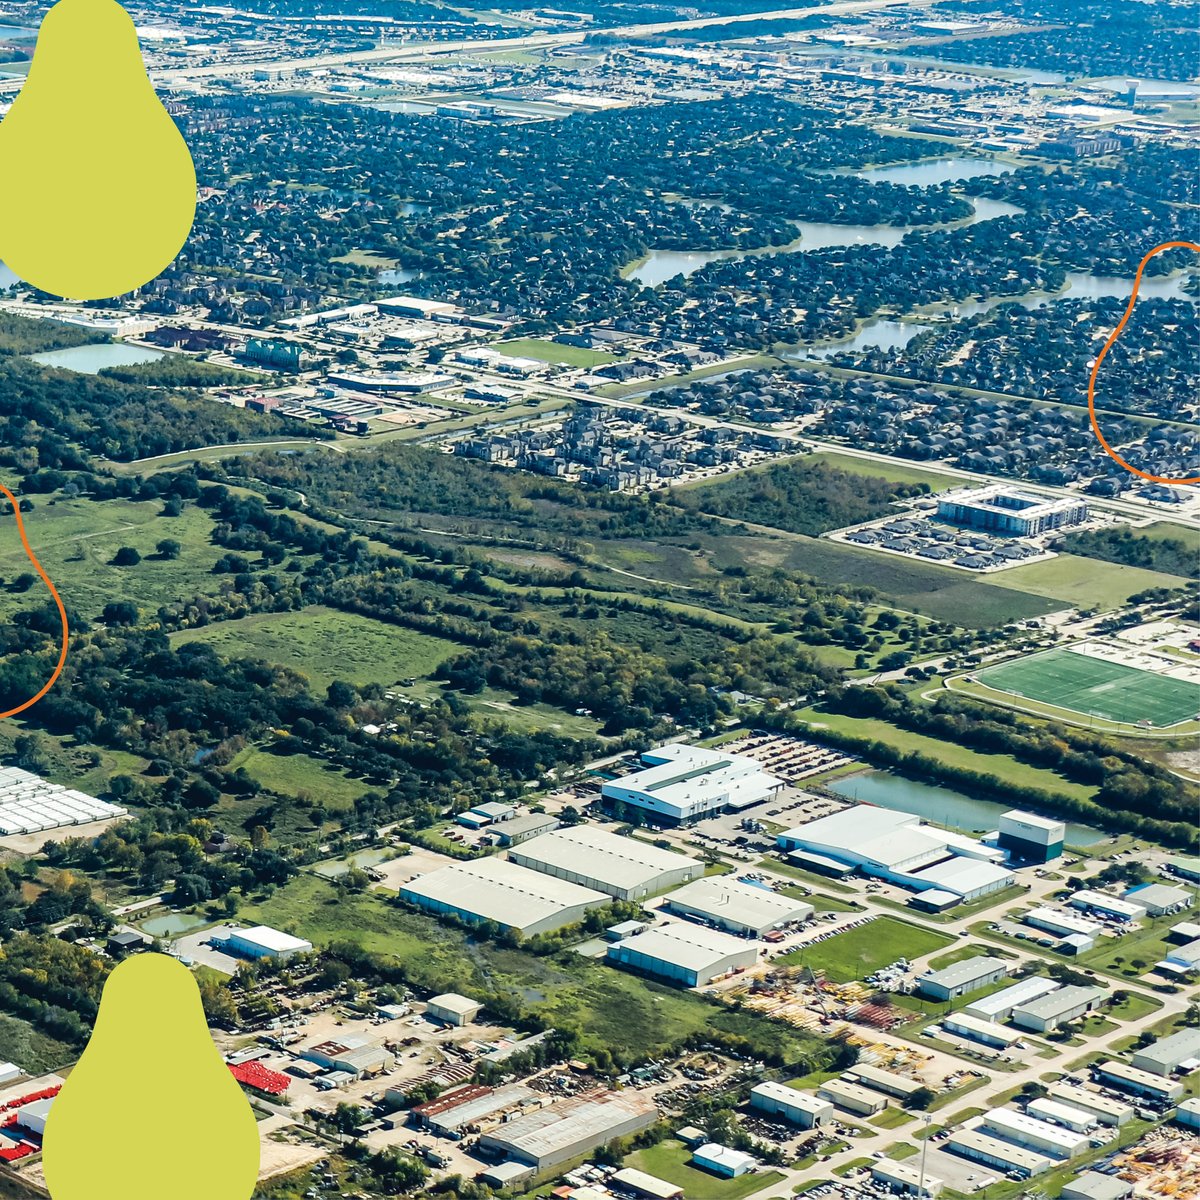 Did you know over 1,000,000 square feet of office warehouse distribution space is planned in Pearland's Lower Kirby? Learn about these developments and more in our 2023 Annual Report. bit.ly/43C3XQQ